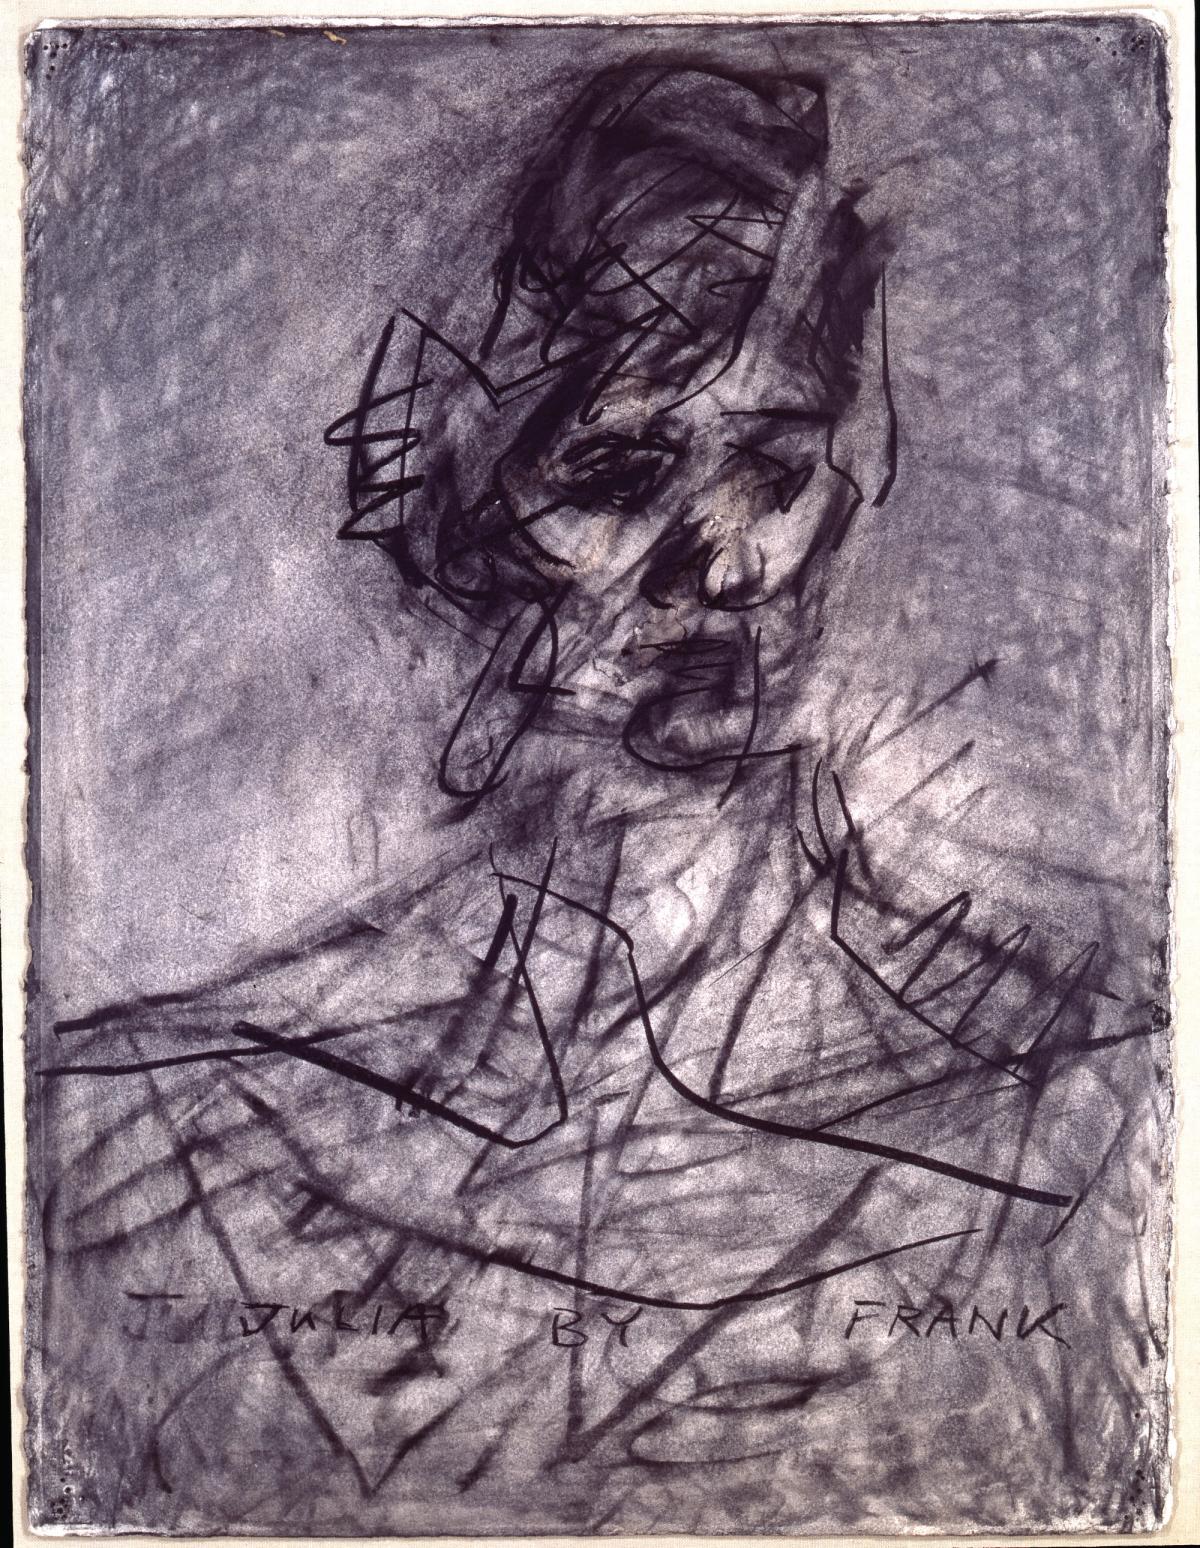 Frank Auerbach's drawings brought out of the shadows